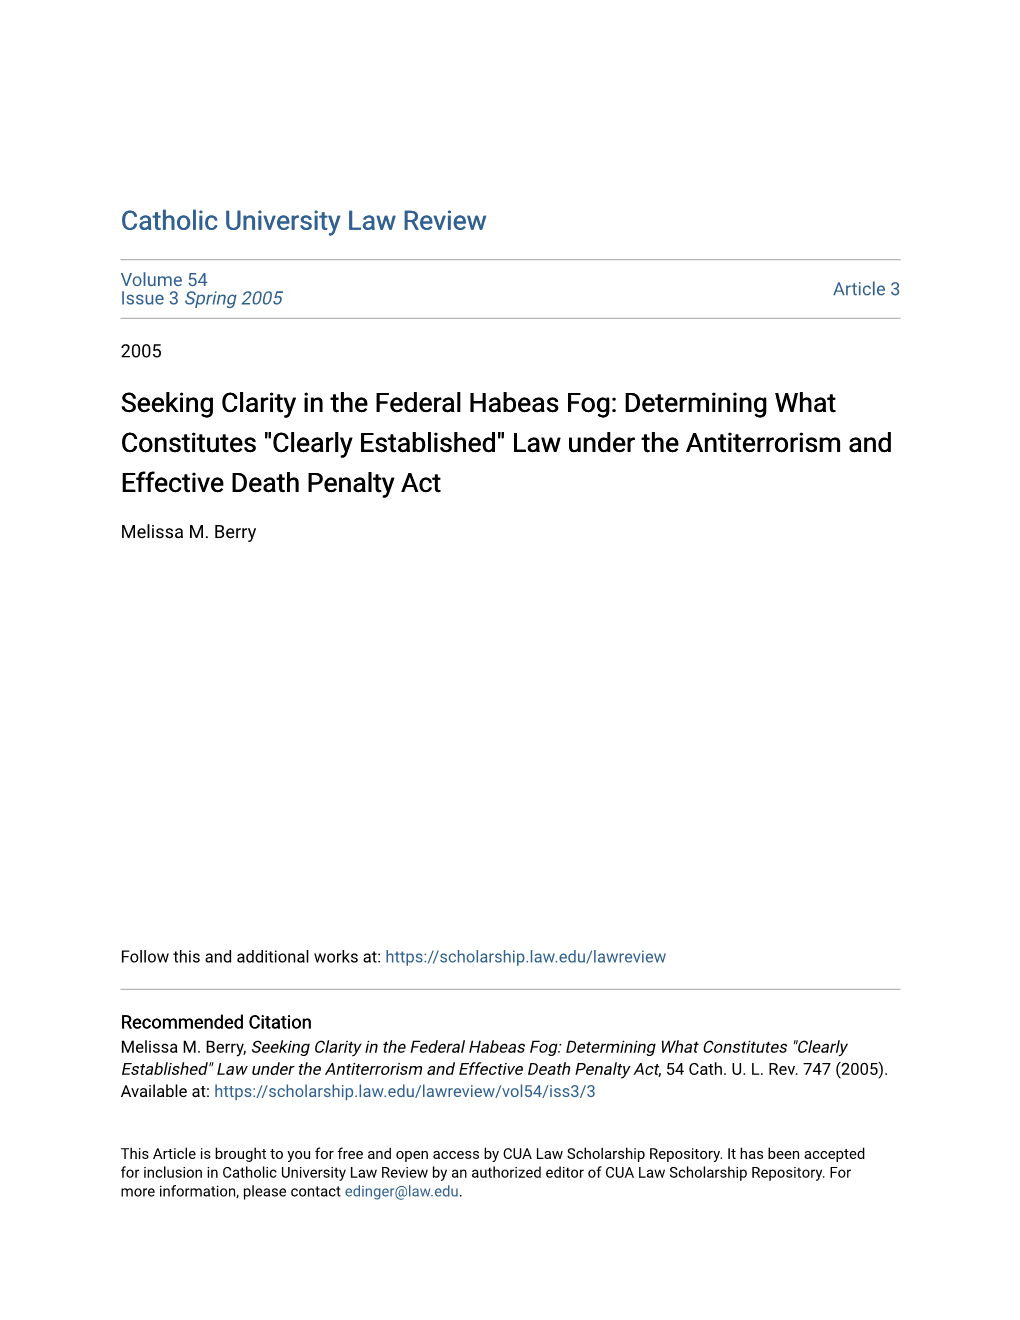 Seeking Clarity in the Federal Habeas Fog: Determining What Constitutes "Clearly Established" Law Under the Antiterrorism and Effective Death Penalty Act